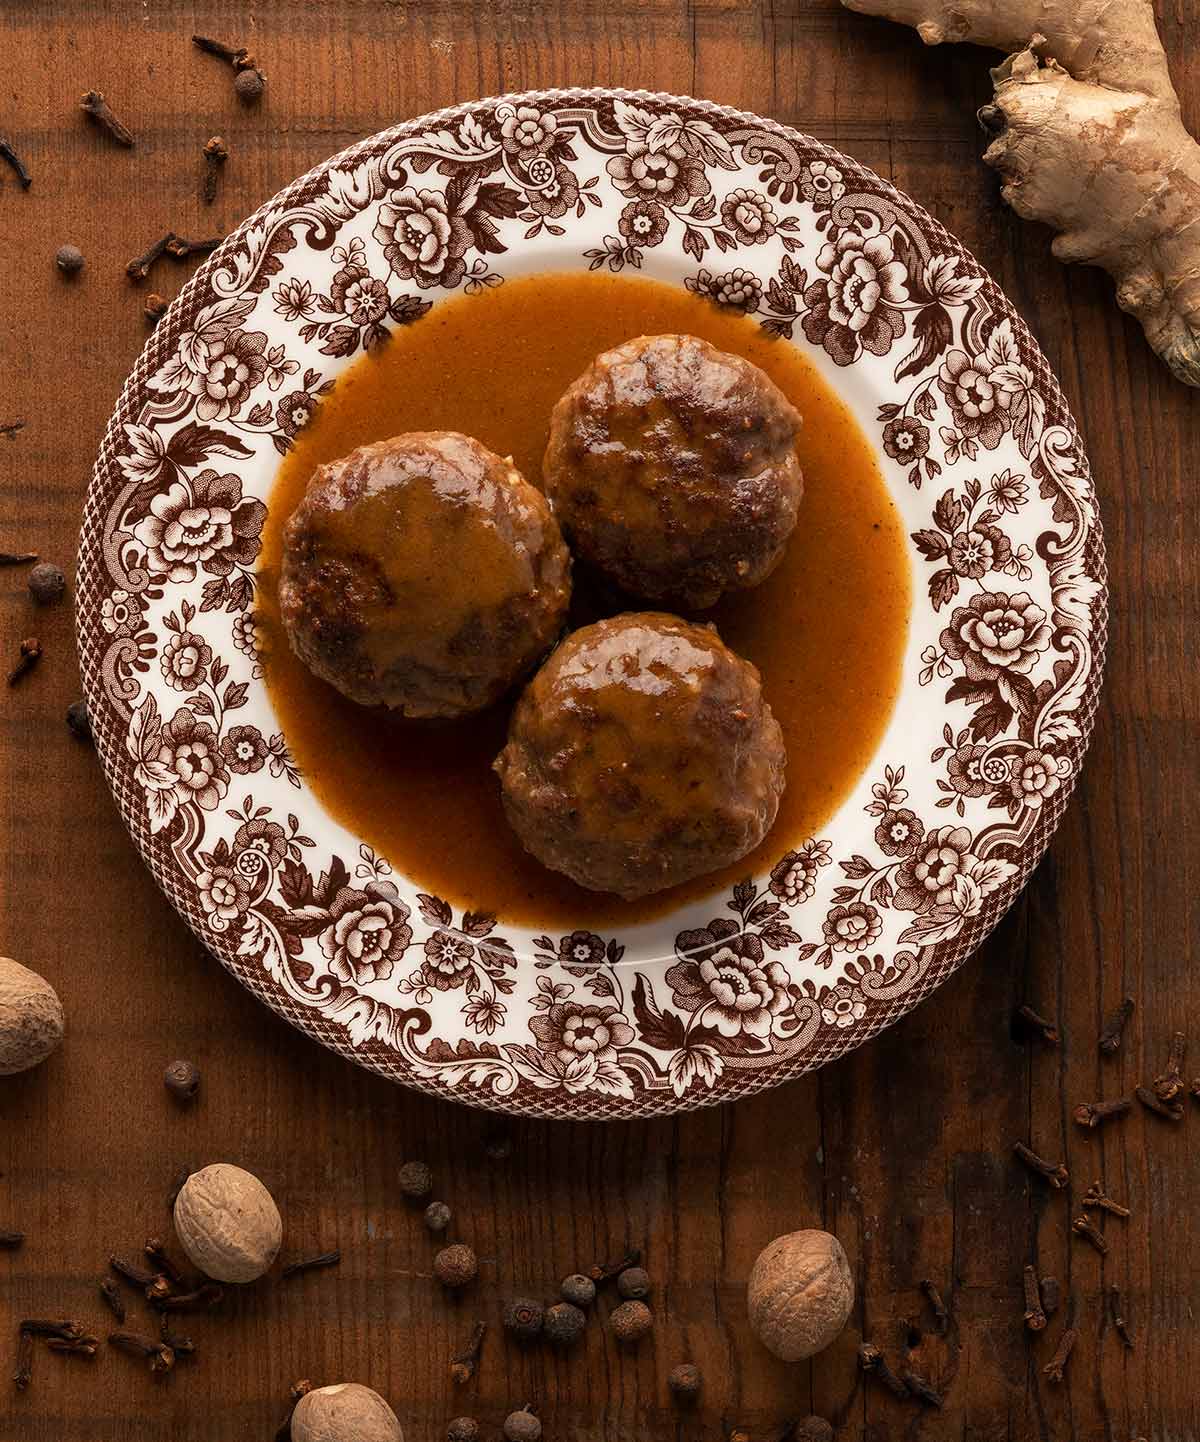 A plate of Norwegian meatballs with gravy